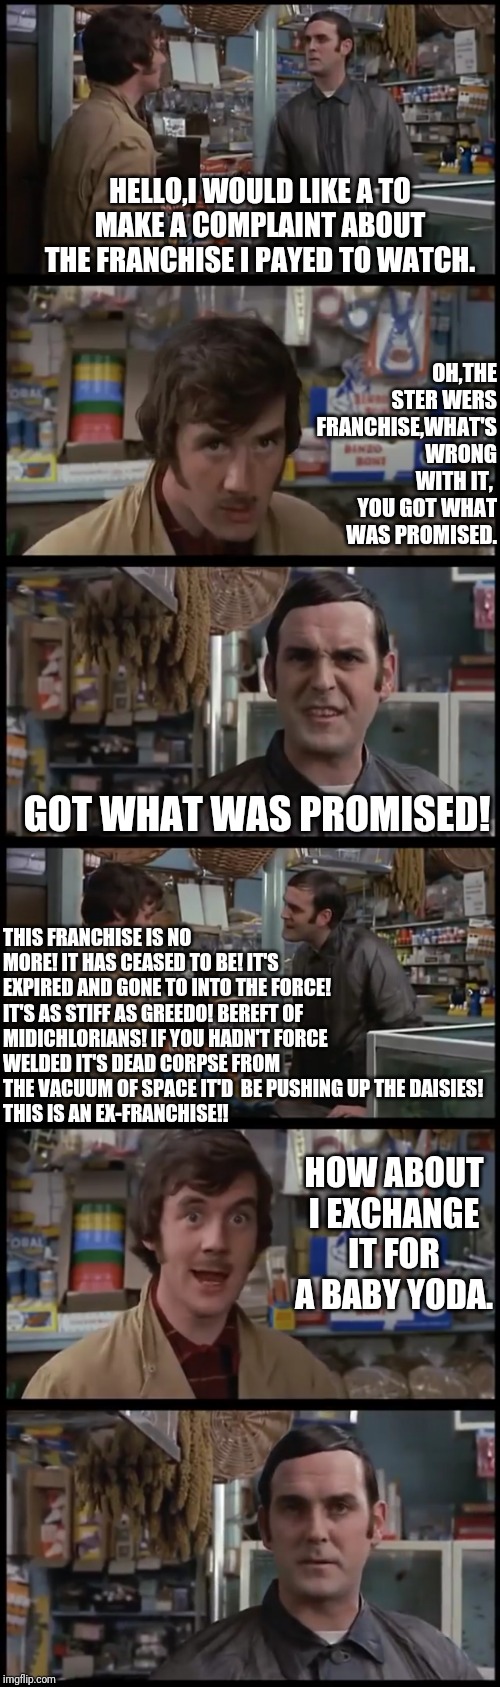 Monty Python Dead Franchise Skit | HELLO,I WOULD LIKE A TO MAKE A COMPLAINT ABOUT THE FRANCHISE I PAYED TO WATCH. OH,THE STER WERS FRANCHISE,WHAT'S WRONG WITH IT,  YOU GOT WHAT WAS PROMISED. GOT WHAT WAS PROMISED! THIS FRANCHISE IS NO MORE! IT HAS CEASED TO BE! IT'S EXPIRED AND GONE TO INTO THE FORCE! IT'S AS STIFF AS GREEDO! BEREFT OF MIDICHLORIANS! IF YOU HADN'T FORCE WELDED IT'S DEAD CORPSE FROM THE VACUUM OF SPACE IT'D  BE PUSHING UP THE DAISIES!
THIS IS AN EX-FRANCHISE!! HOW ABOUT I EXCHANGE IT FOR A BABY YODA. | image tagged in star wars,disney killed star wars,monty python | made w/ Imgflip meme maker